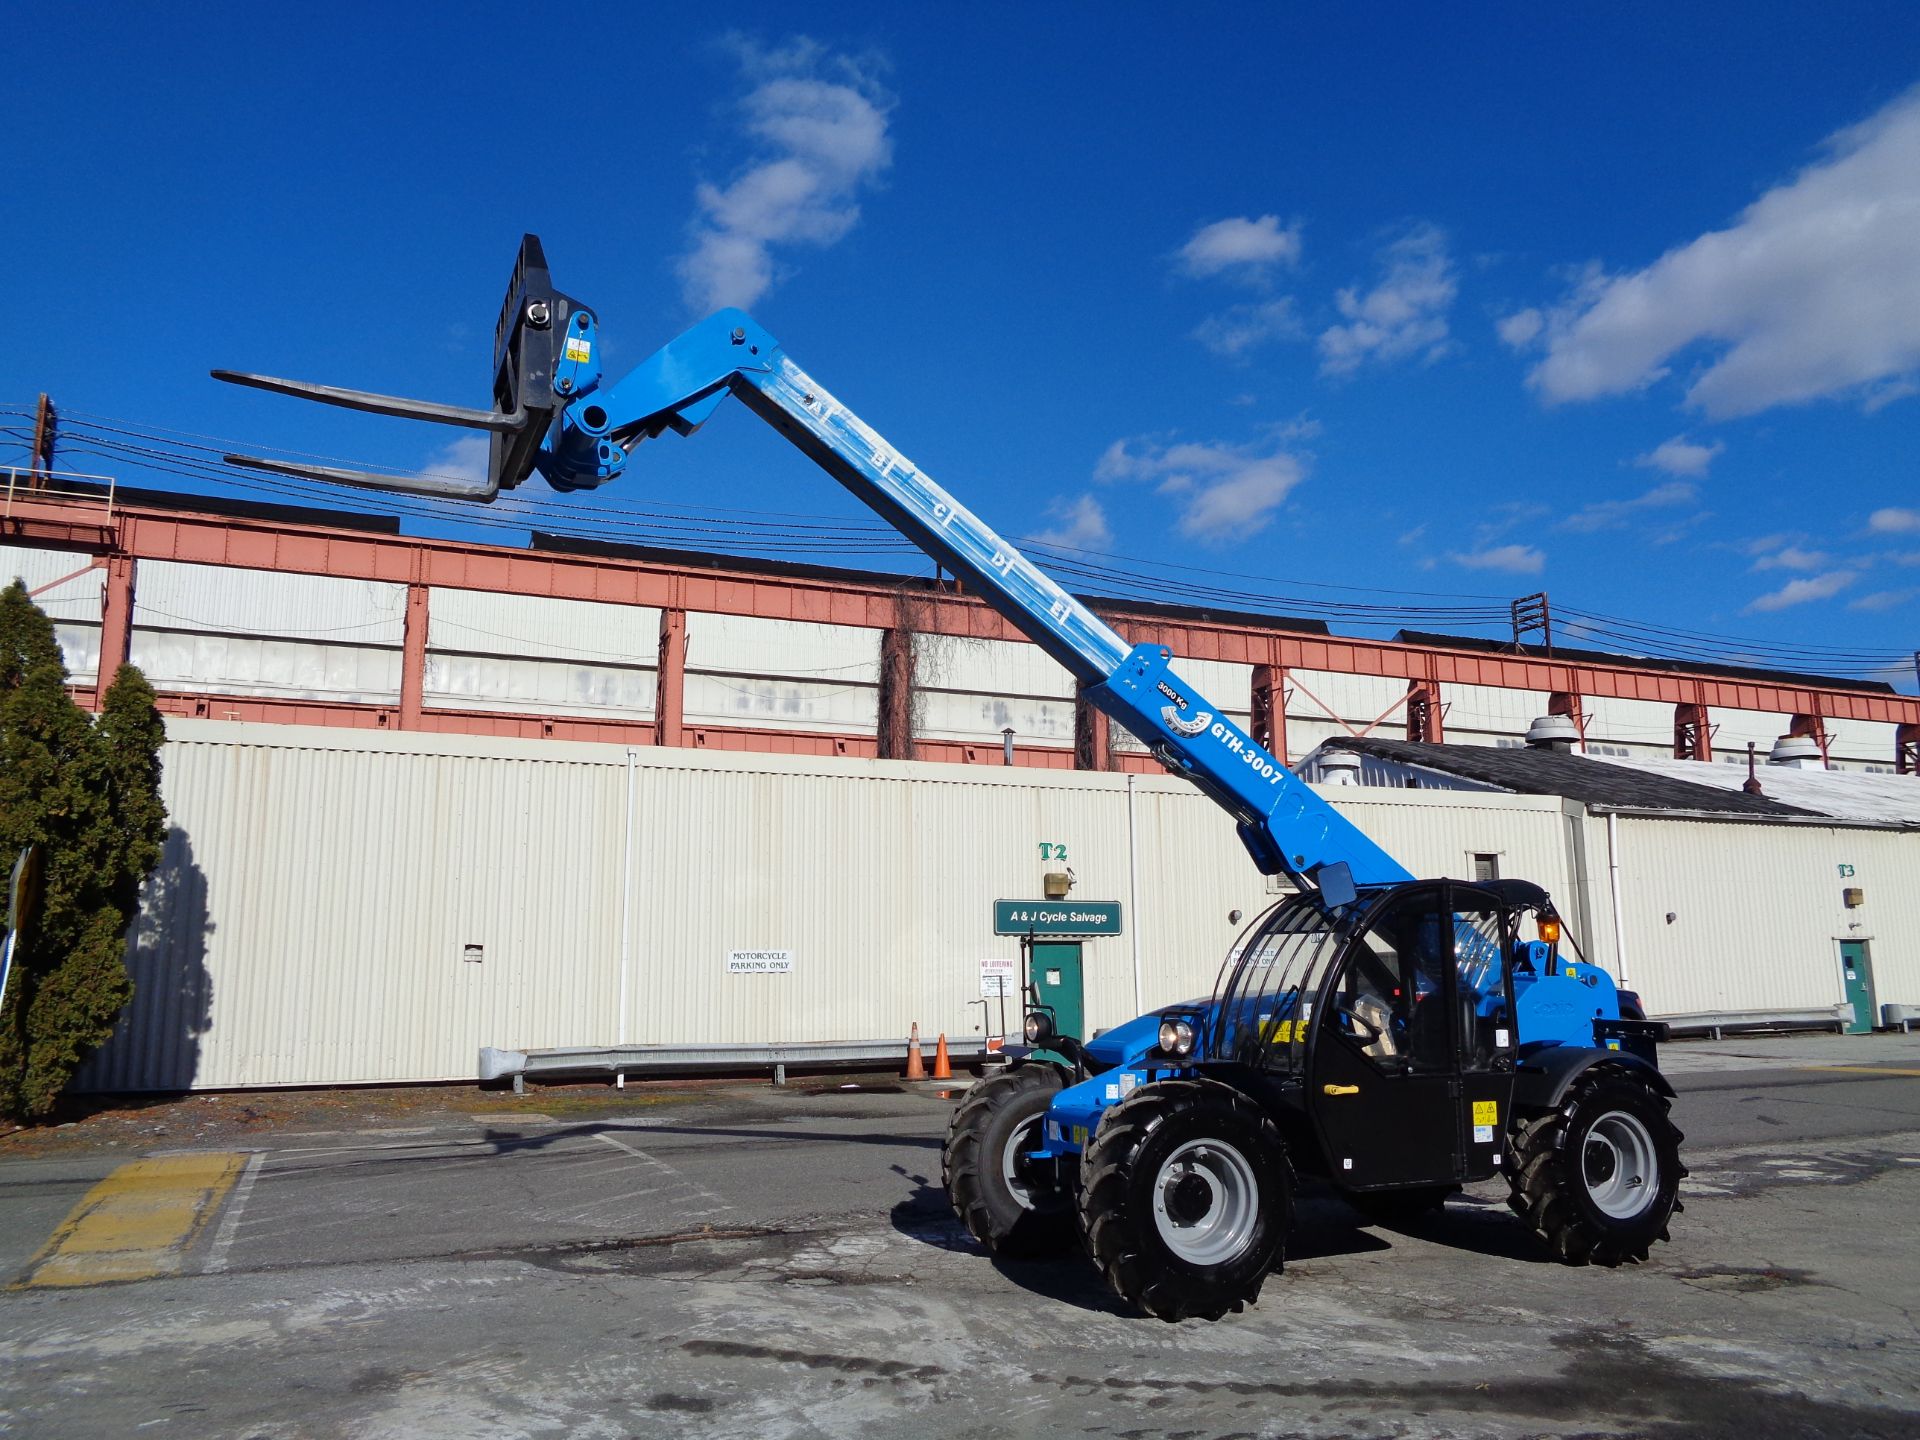 New Unused 2018 Genie GTH3007 Telescopic Forklift 6,600 lbs - Enclosed Cab - Image 8 of 23